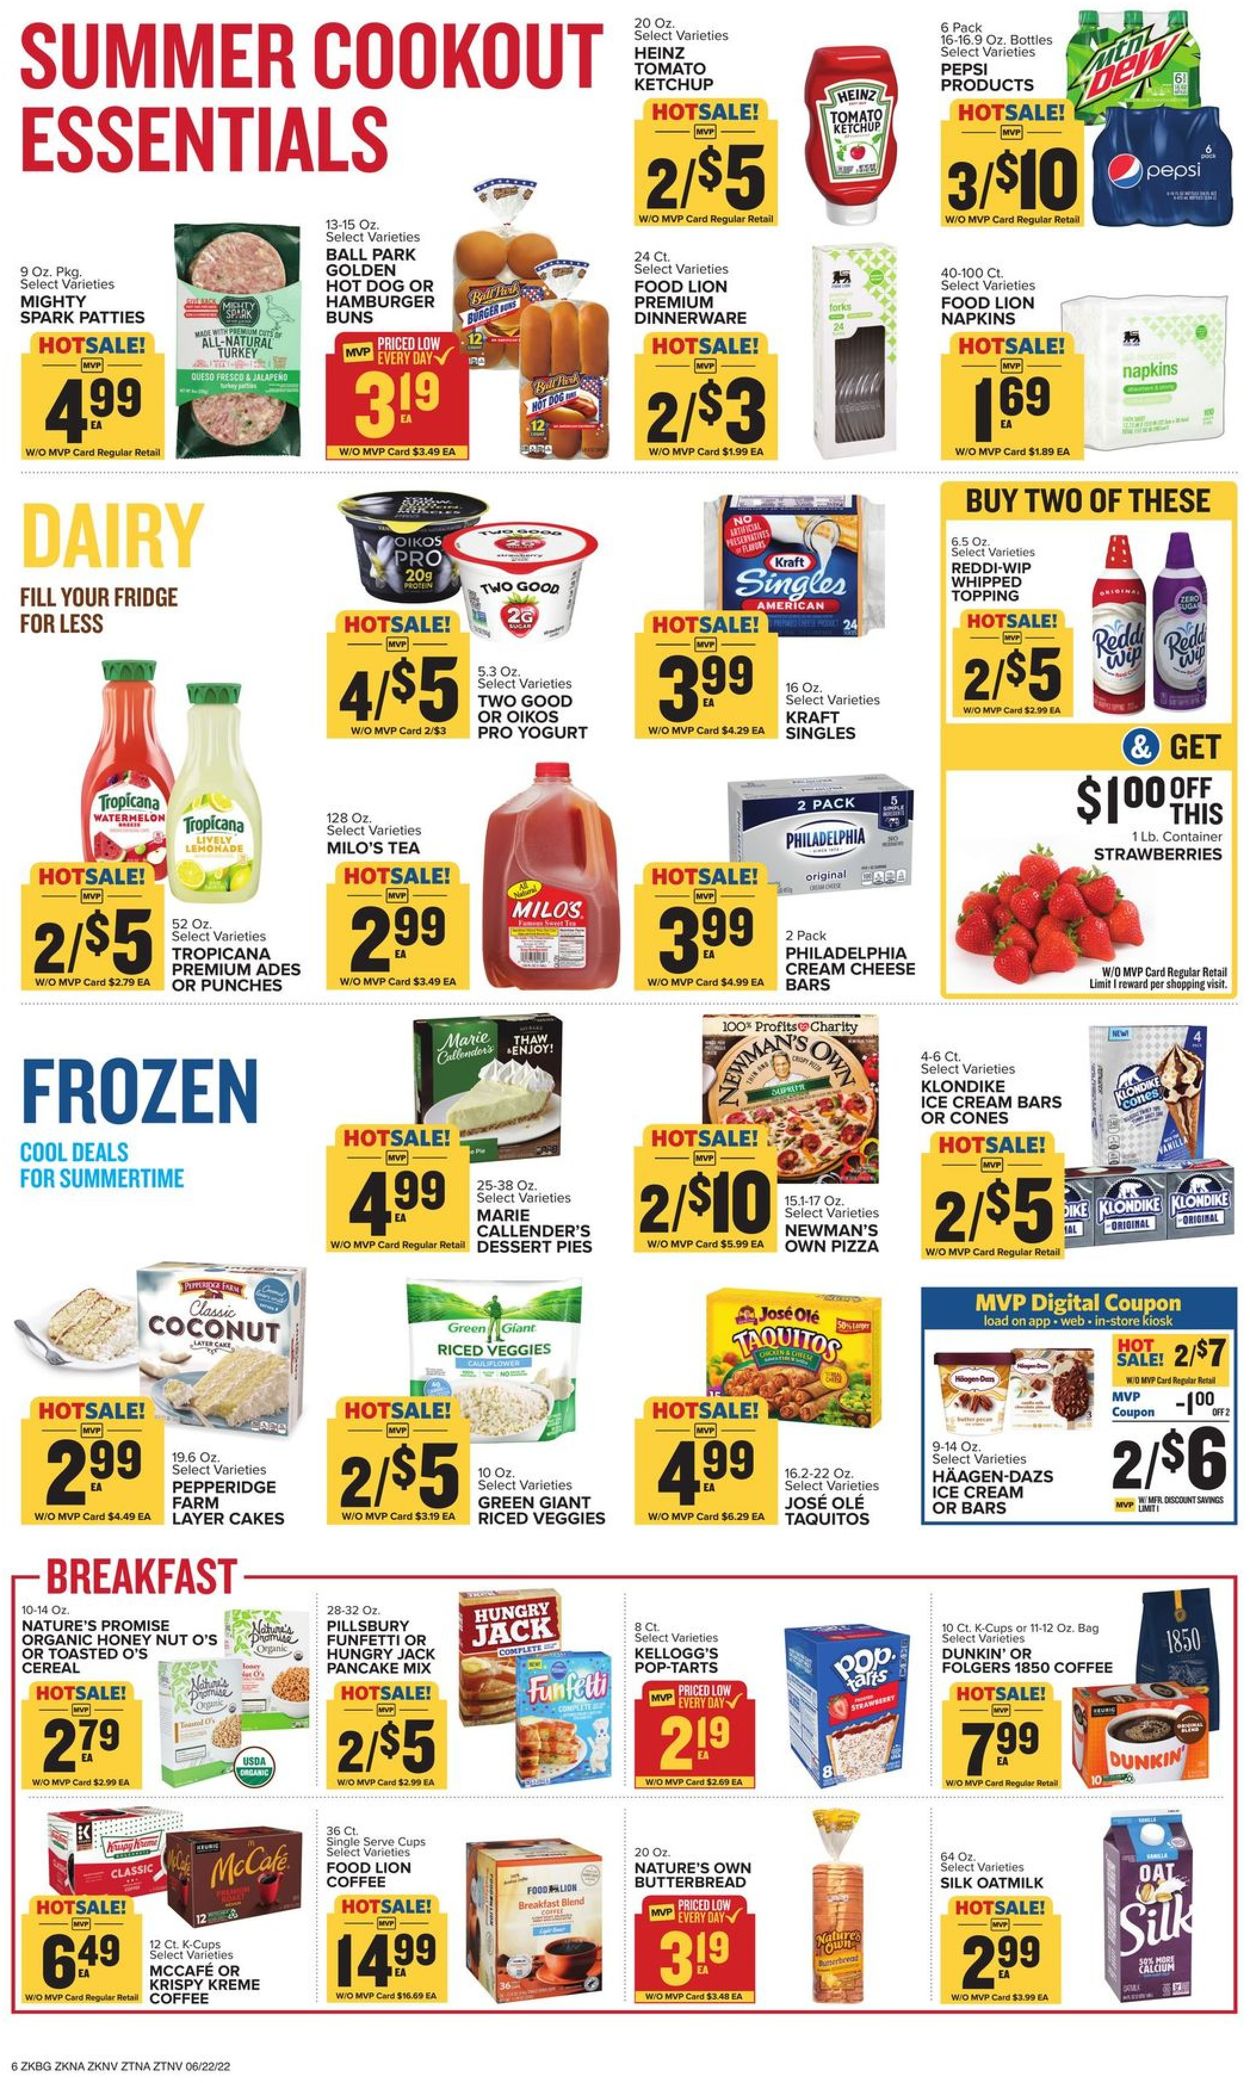 Catalogue Food Lion from 06/22/2022